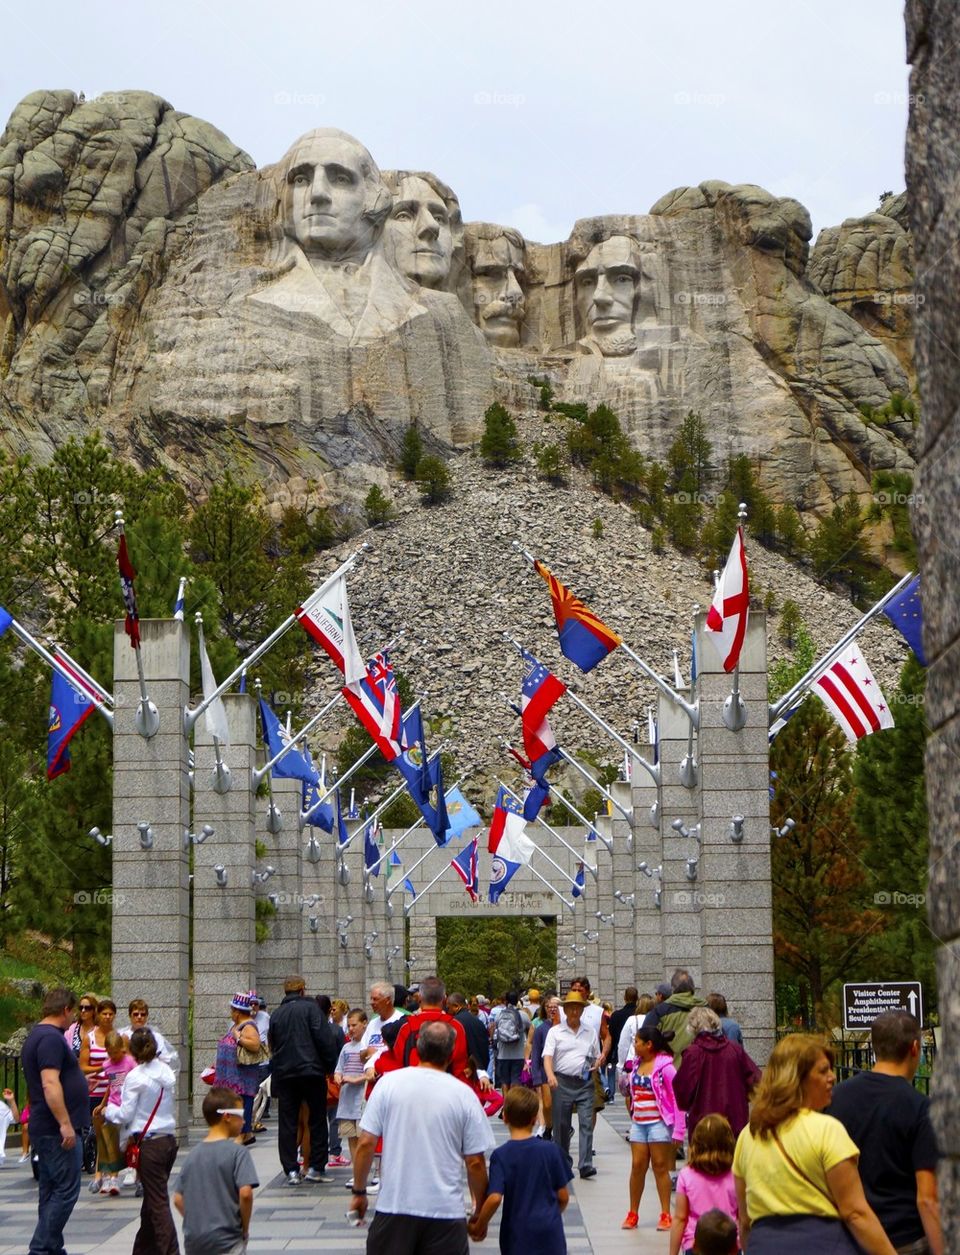 Mount Rushmore national Monument